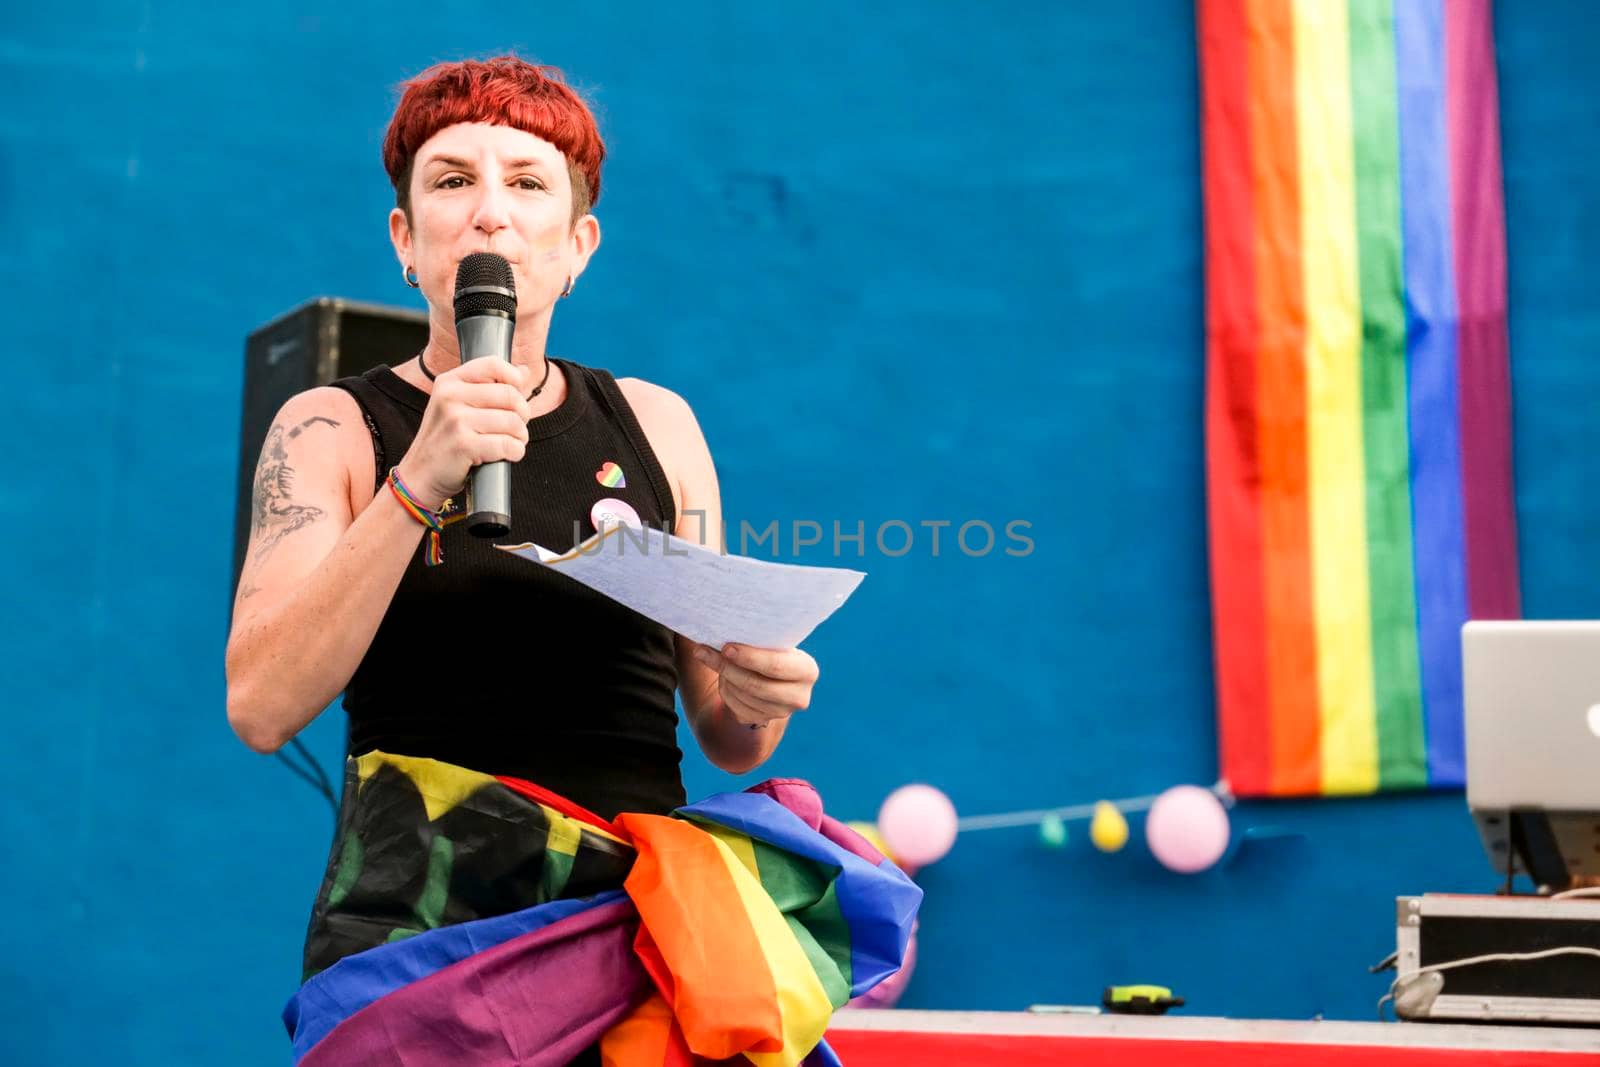 Lesbian Woman giving the proclamation speech at the Gay Pride Parade by soniabonet